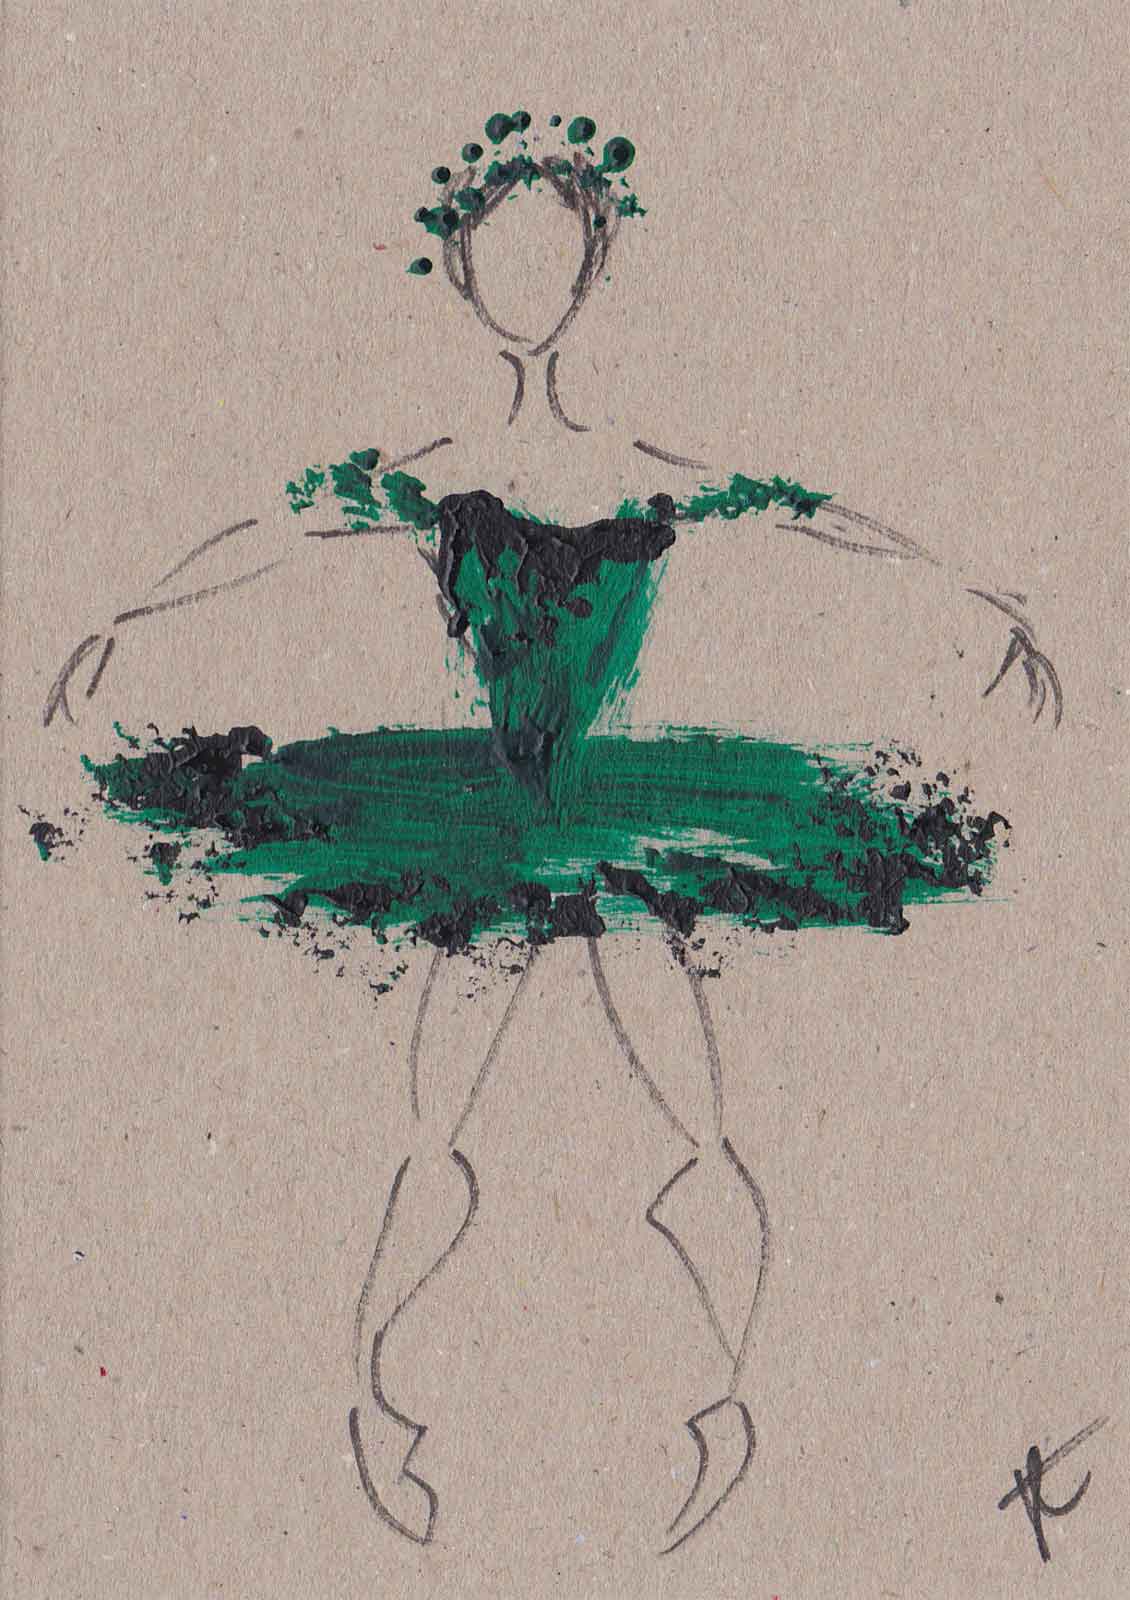 A la seconde – hand-painted ballerina note card